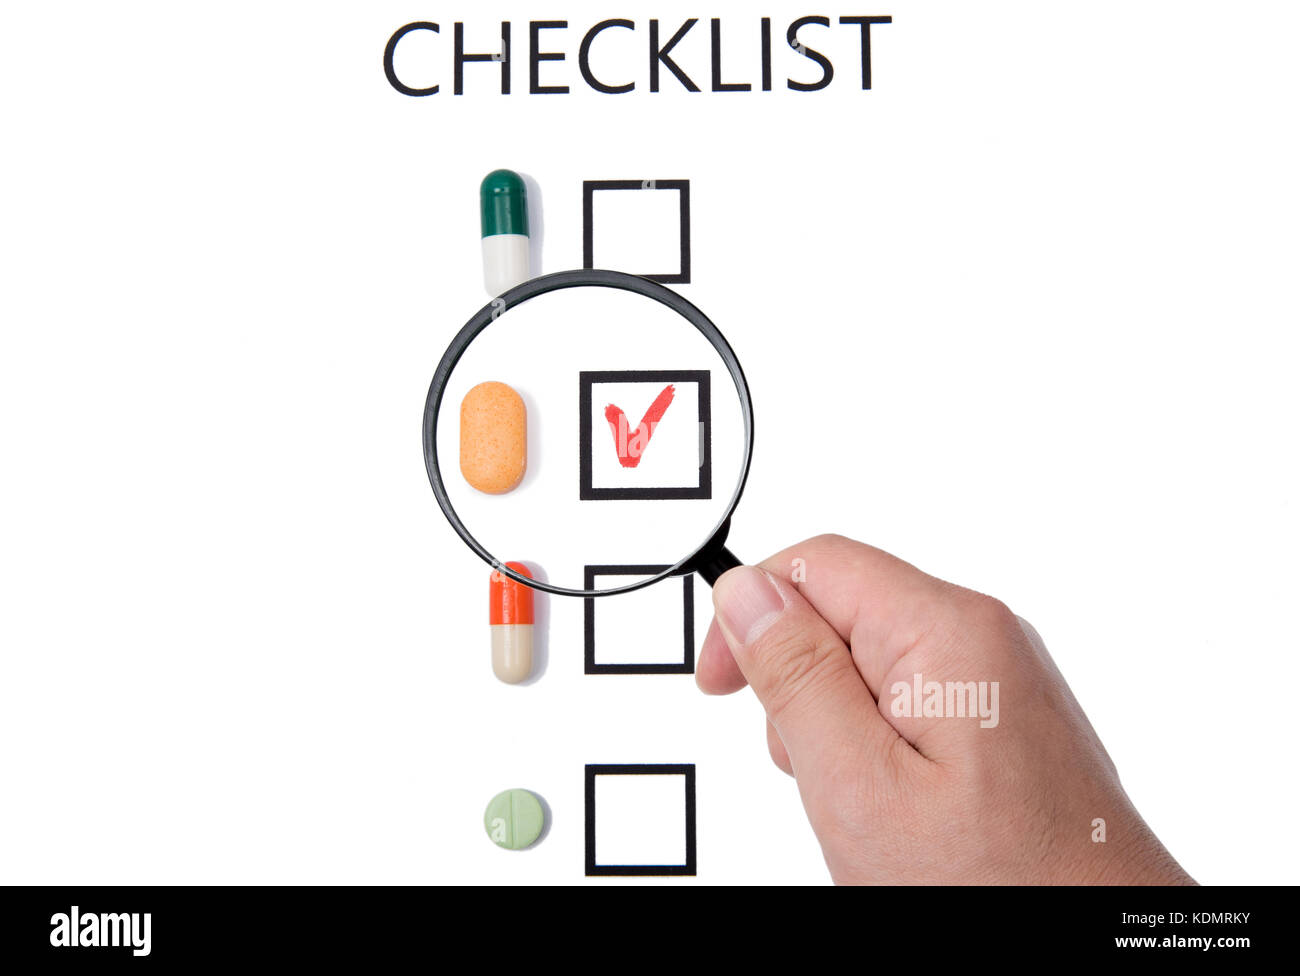 Checklist on white paper with Magnifier Stock Photo